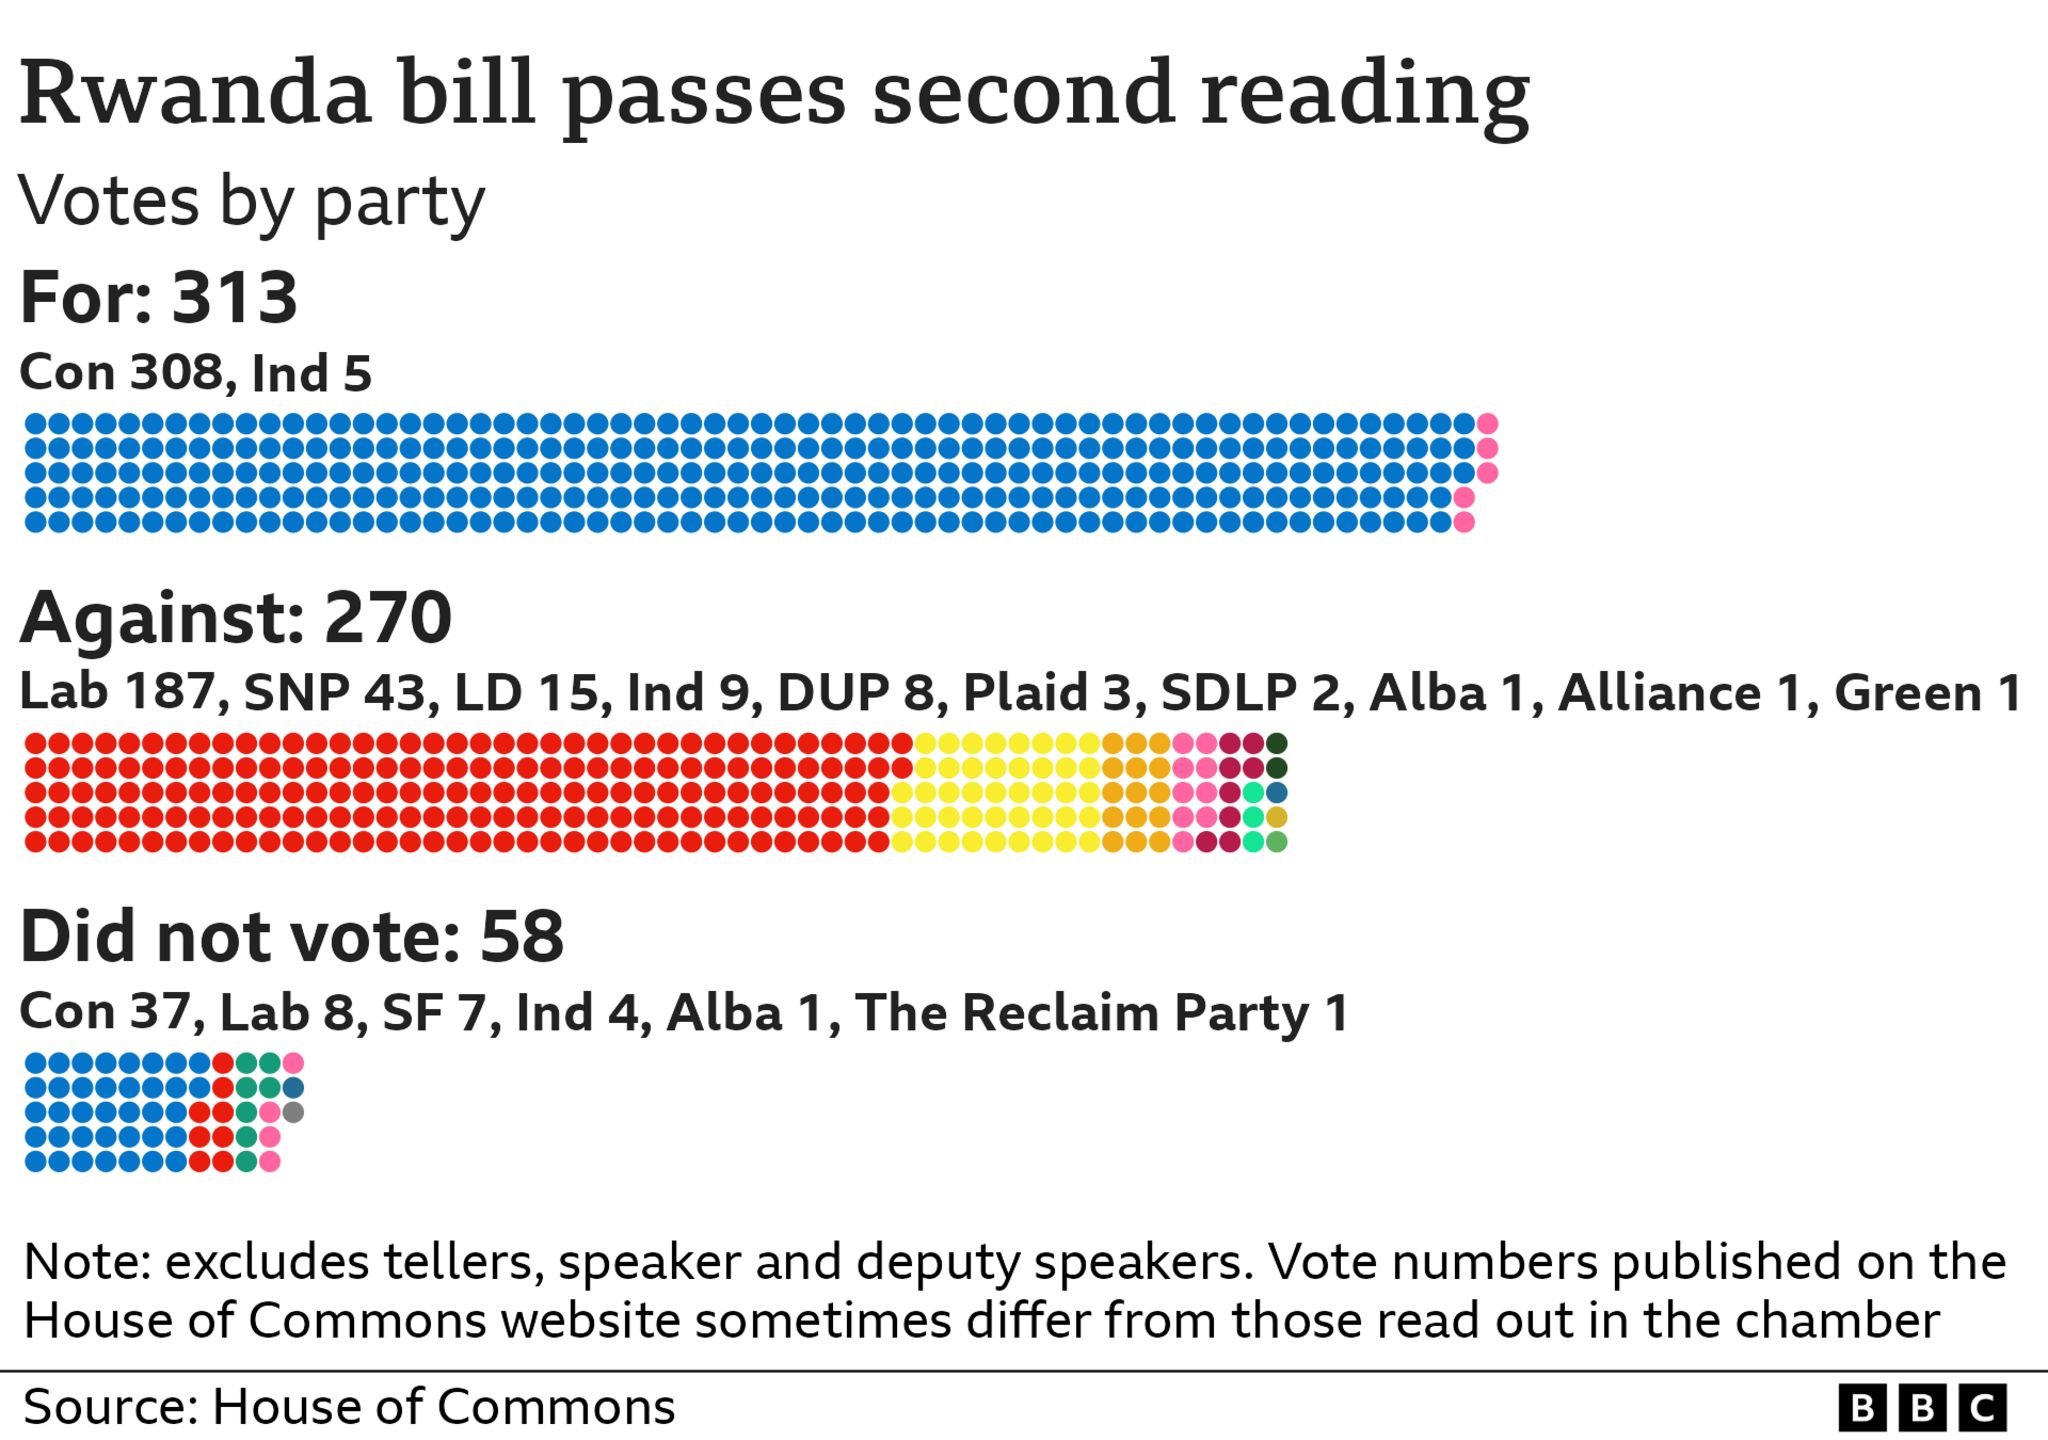 A dot chart showing 313 MPs, mostly Conservative, voted for the Rwanda Bill, 270 voted against and were mostly a mixture of Labour, the SNP and the Lib Dems, and of the 58 that did not vote, 37 were Conservatives, the rest were a mixture of Labour and other smaller parties